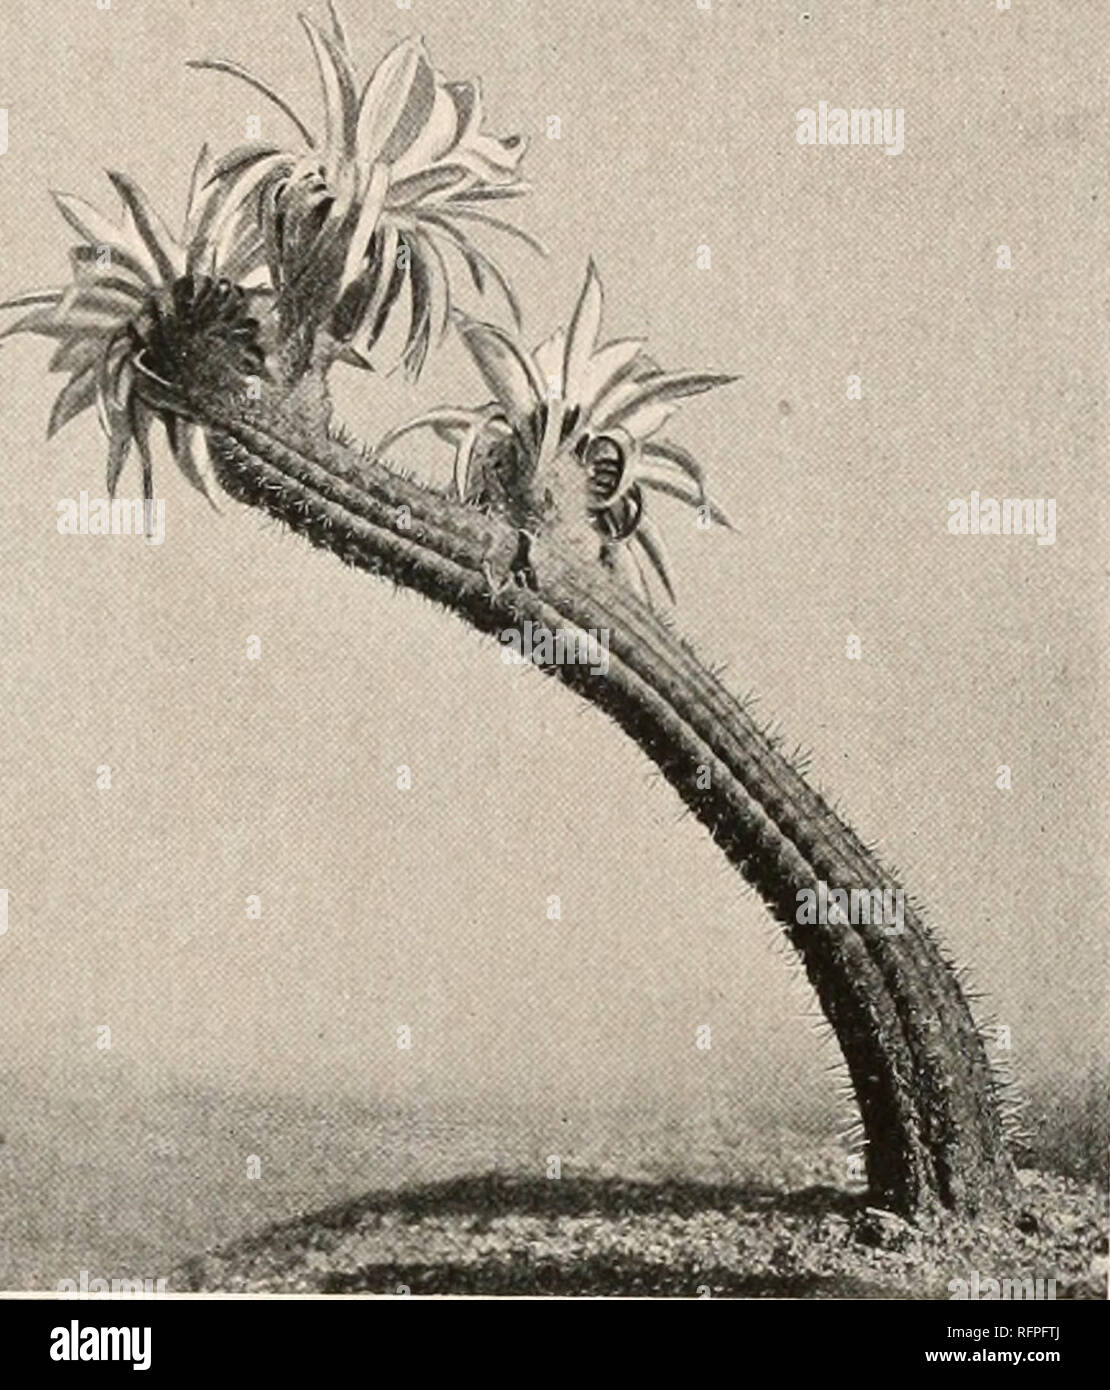 . Carnegie Institution of Washington publication. TRICHOCEREUS. This species has heretofore been unknown to us, but fine specimens, both living and for the herbarium, were obtained by J. A. Shafer at Tapia, Tucuman, near the type locality, February 9, 1917 (No. 98). Illustration: Schumann, Gesamtb. Kakteen f. 14, as Cereus thelegonus. Figure 188 is from a photograph of a flowering branch in the garden of Dr. Spegazzini at La Plata, Argentina; fig- ure 189 is from a photograph of the wild plant taken by Dr. Shafer in 1917 at Tapia, Argentina. 2. Trichocereus thelegonoides (Spegazzini). Cereus t Stock Photo